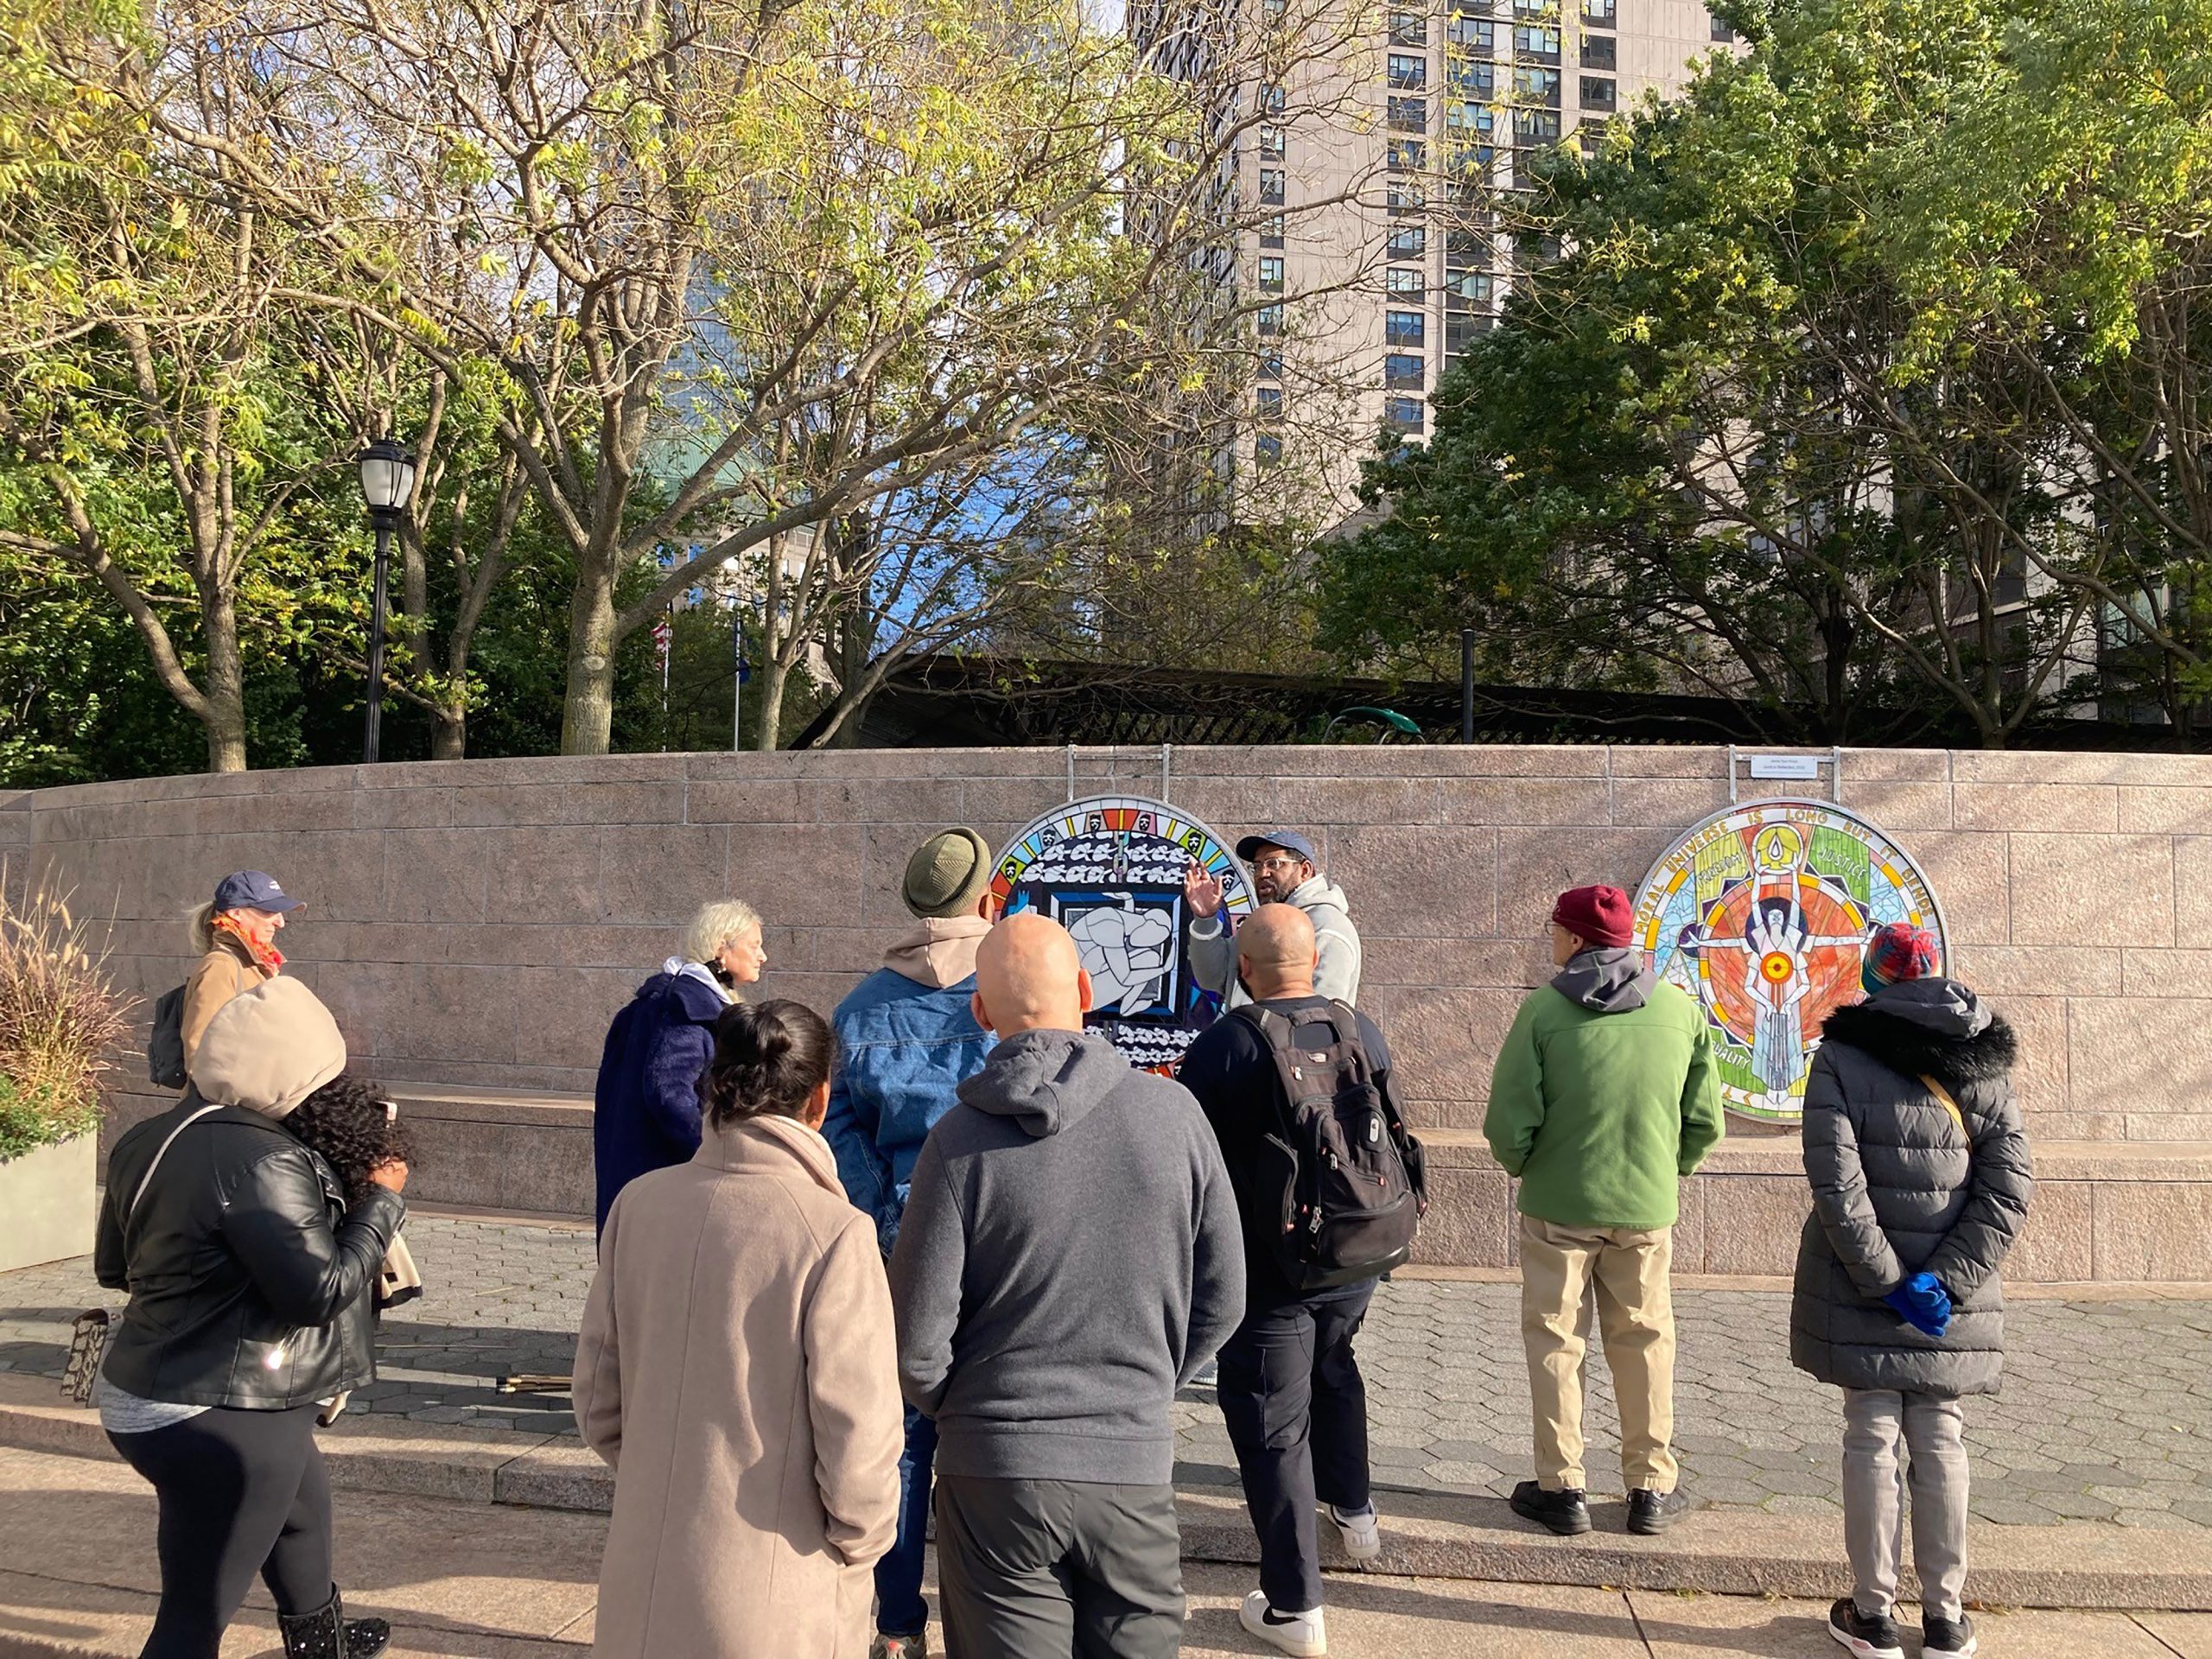 A photograph of the artist James Yaya Hough, a Black man in glasses and a blue cap, speaking to a crowd of people in a park in front of his public artwork Justice Reflected.